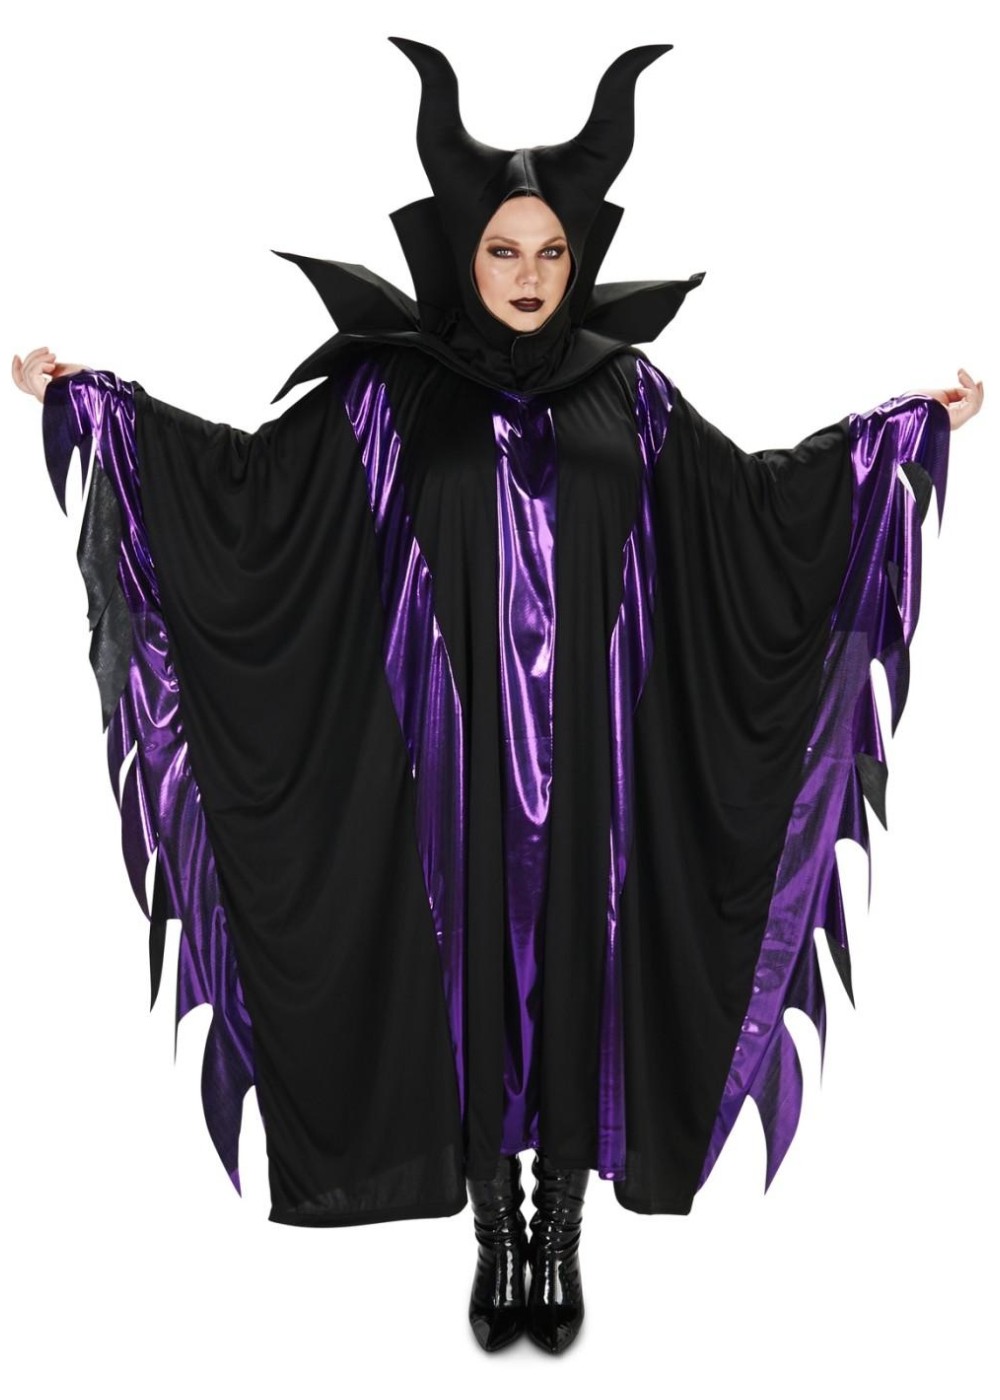 Zamtapary Women Maleficent Costume Black Witch Cosplay Costumes with Headwear